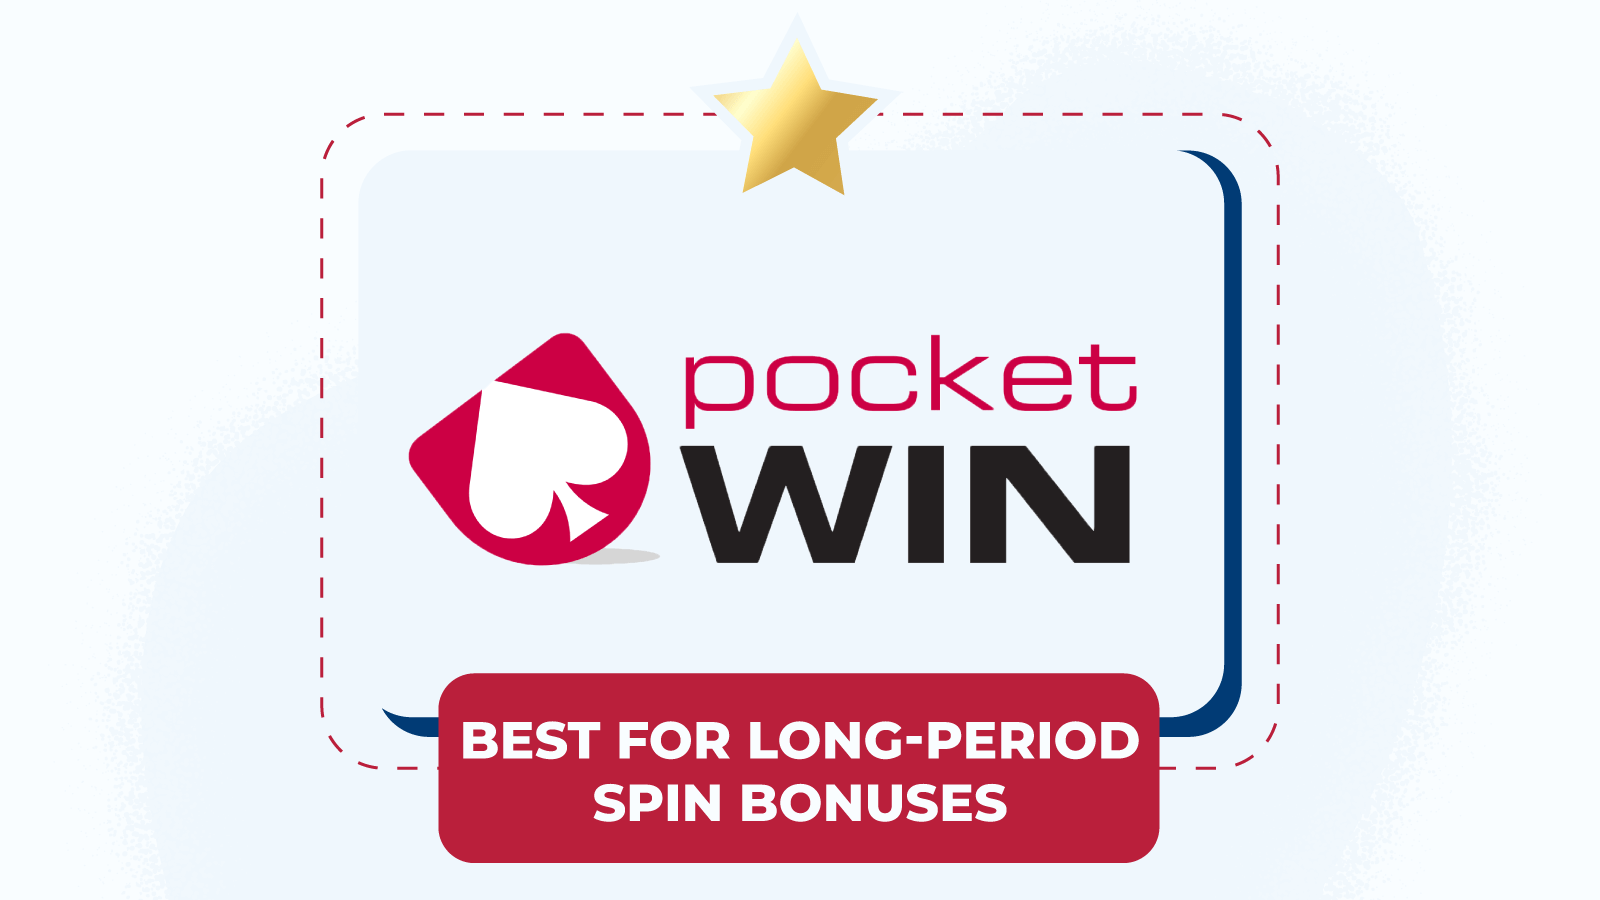 PocketWin – Best for long-period spin bonuses